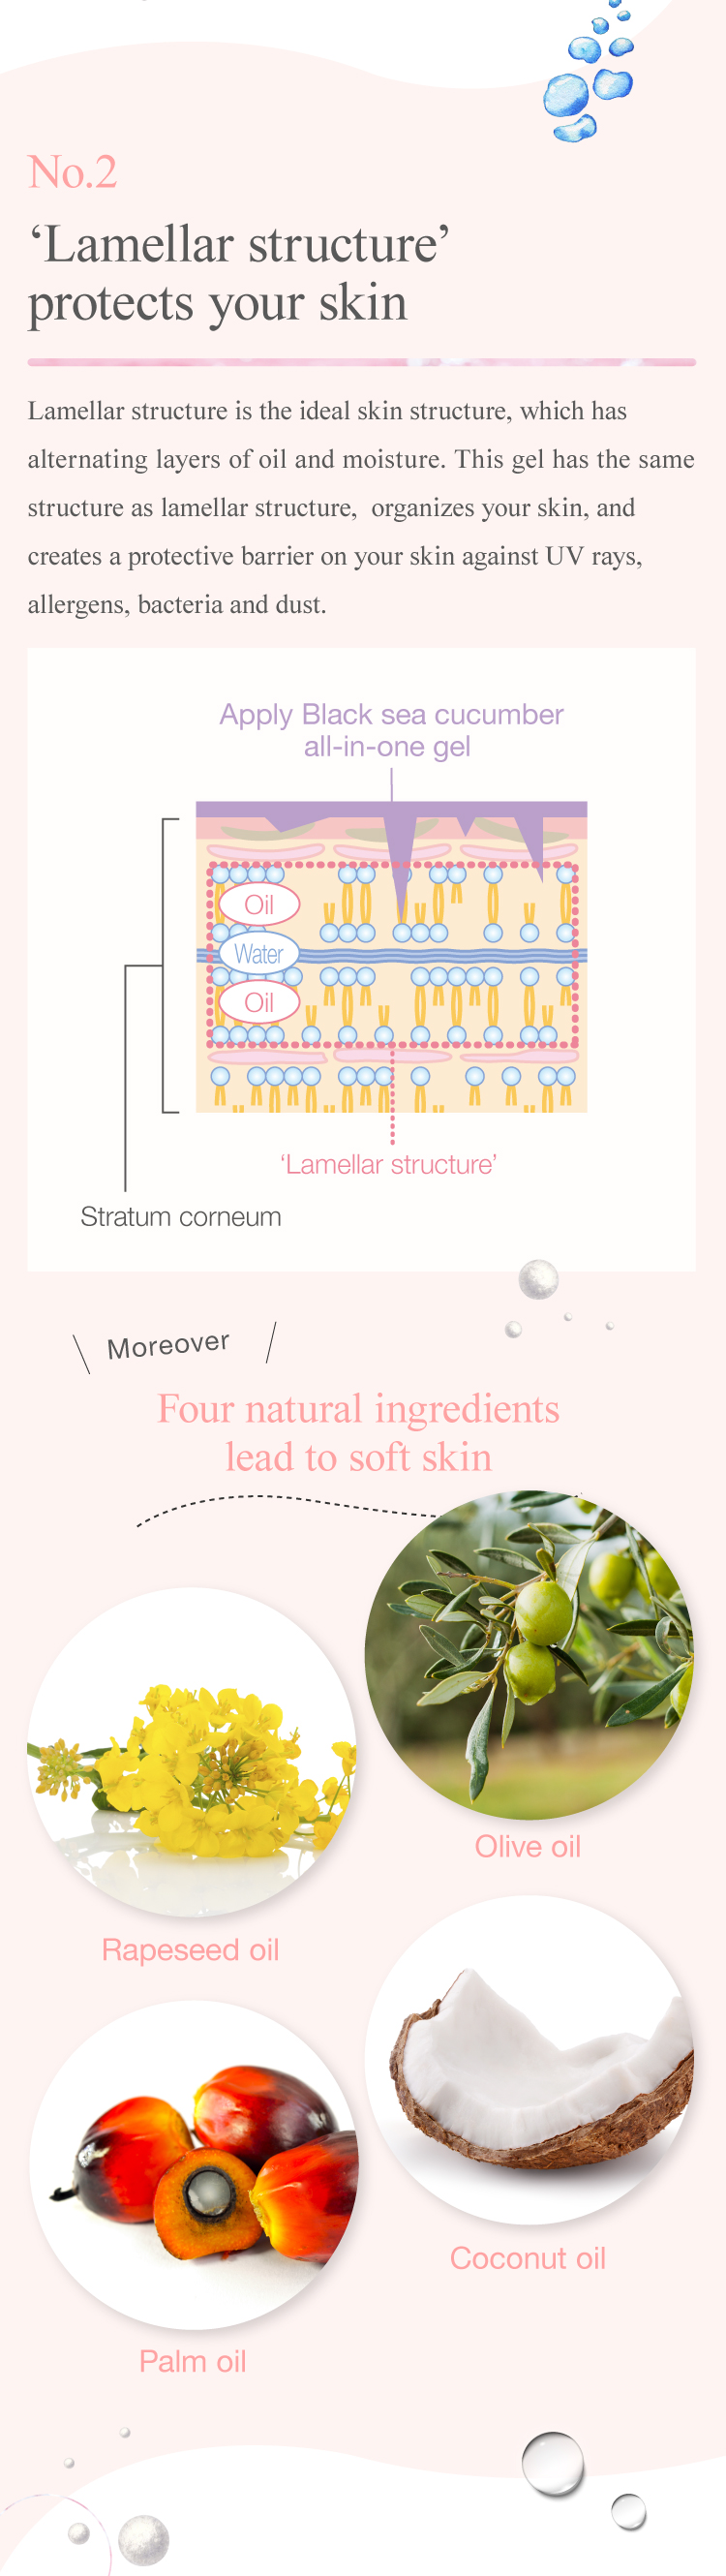 Black sea cucumber all-in-one gel's ‘Lamellar structure’ protects your skin